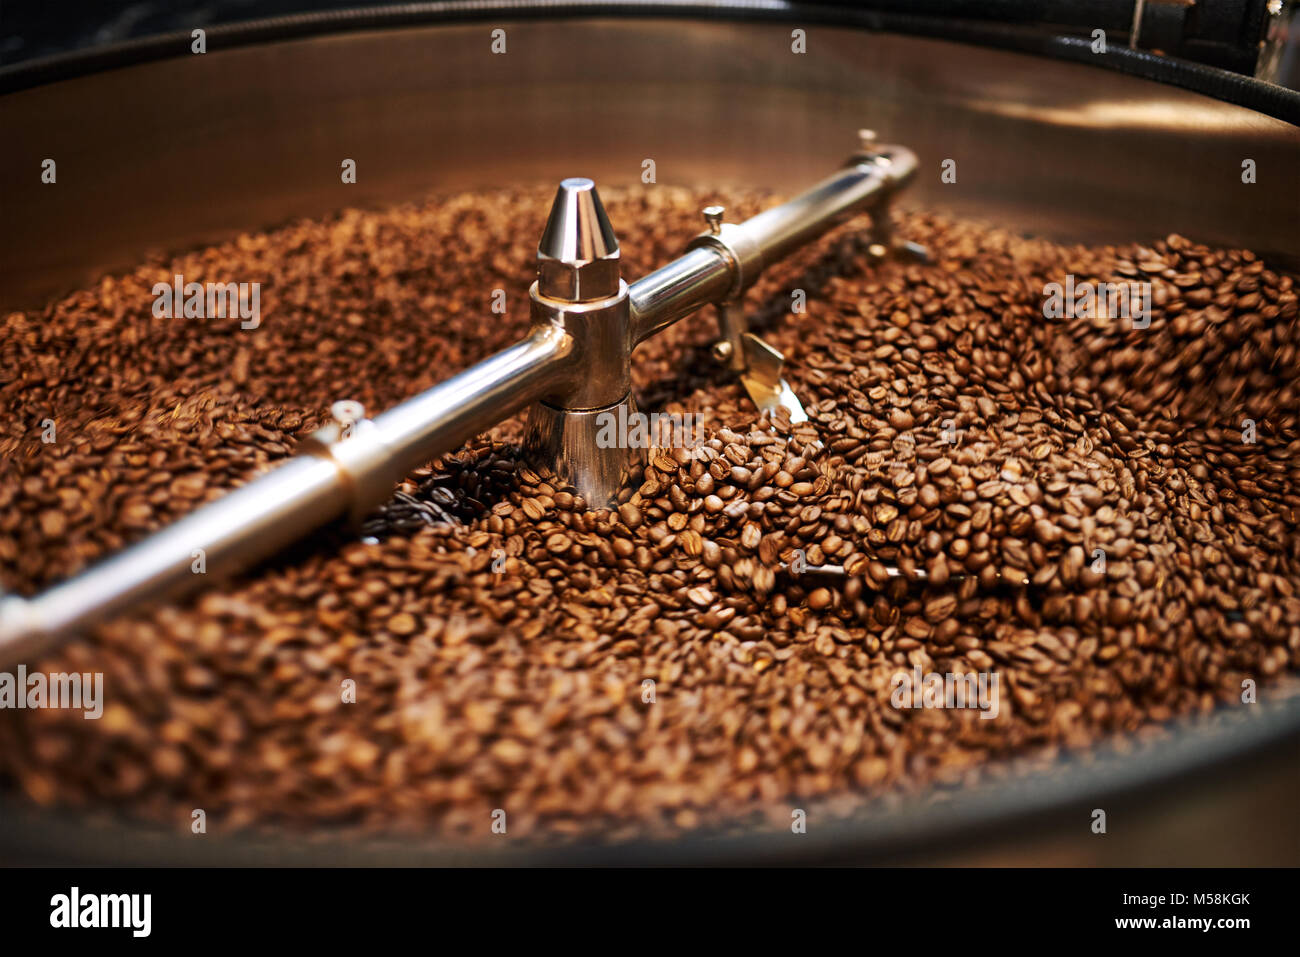 Stainless steel arms mixing freshly roasted coffee beans in large stainless steel cooling drum where the beans are cooled down before packaging or sto Stock Photo